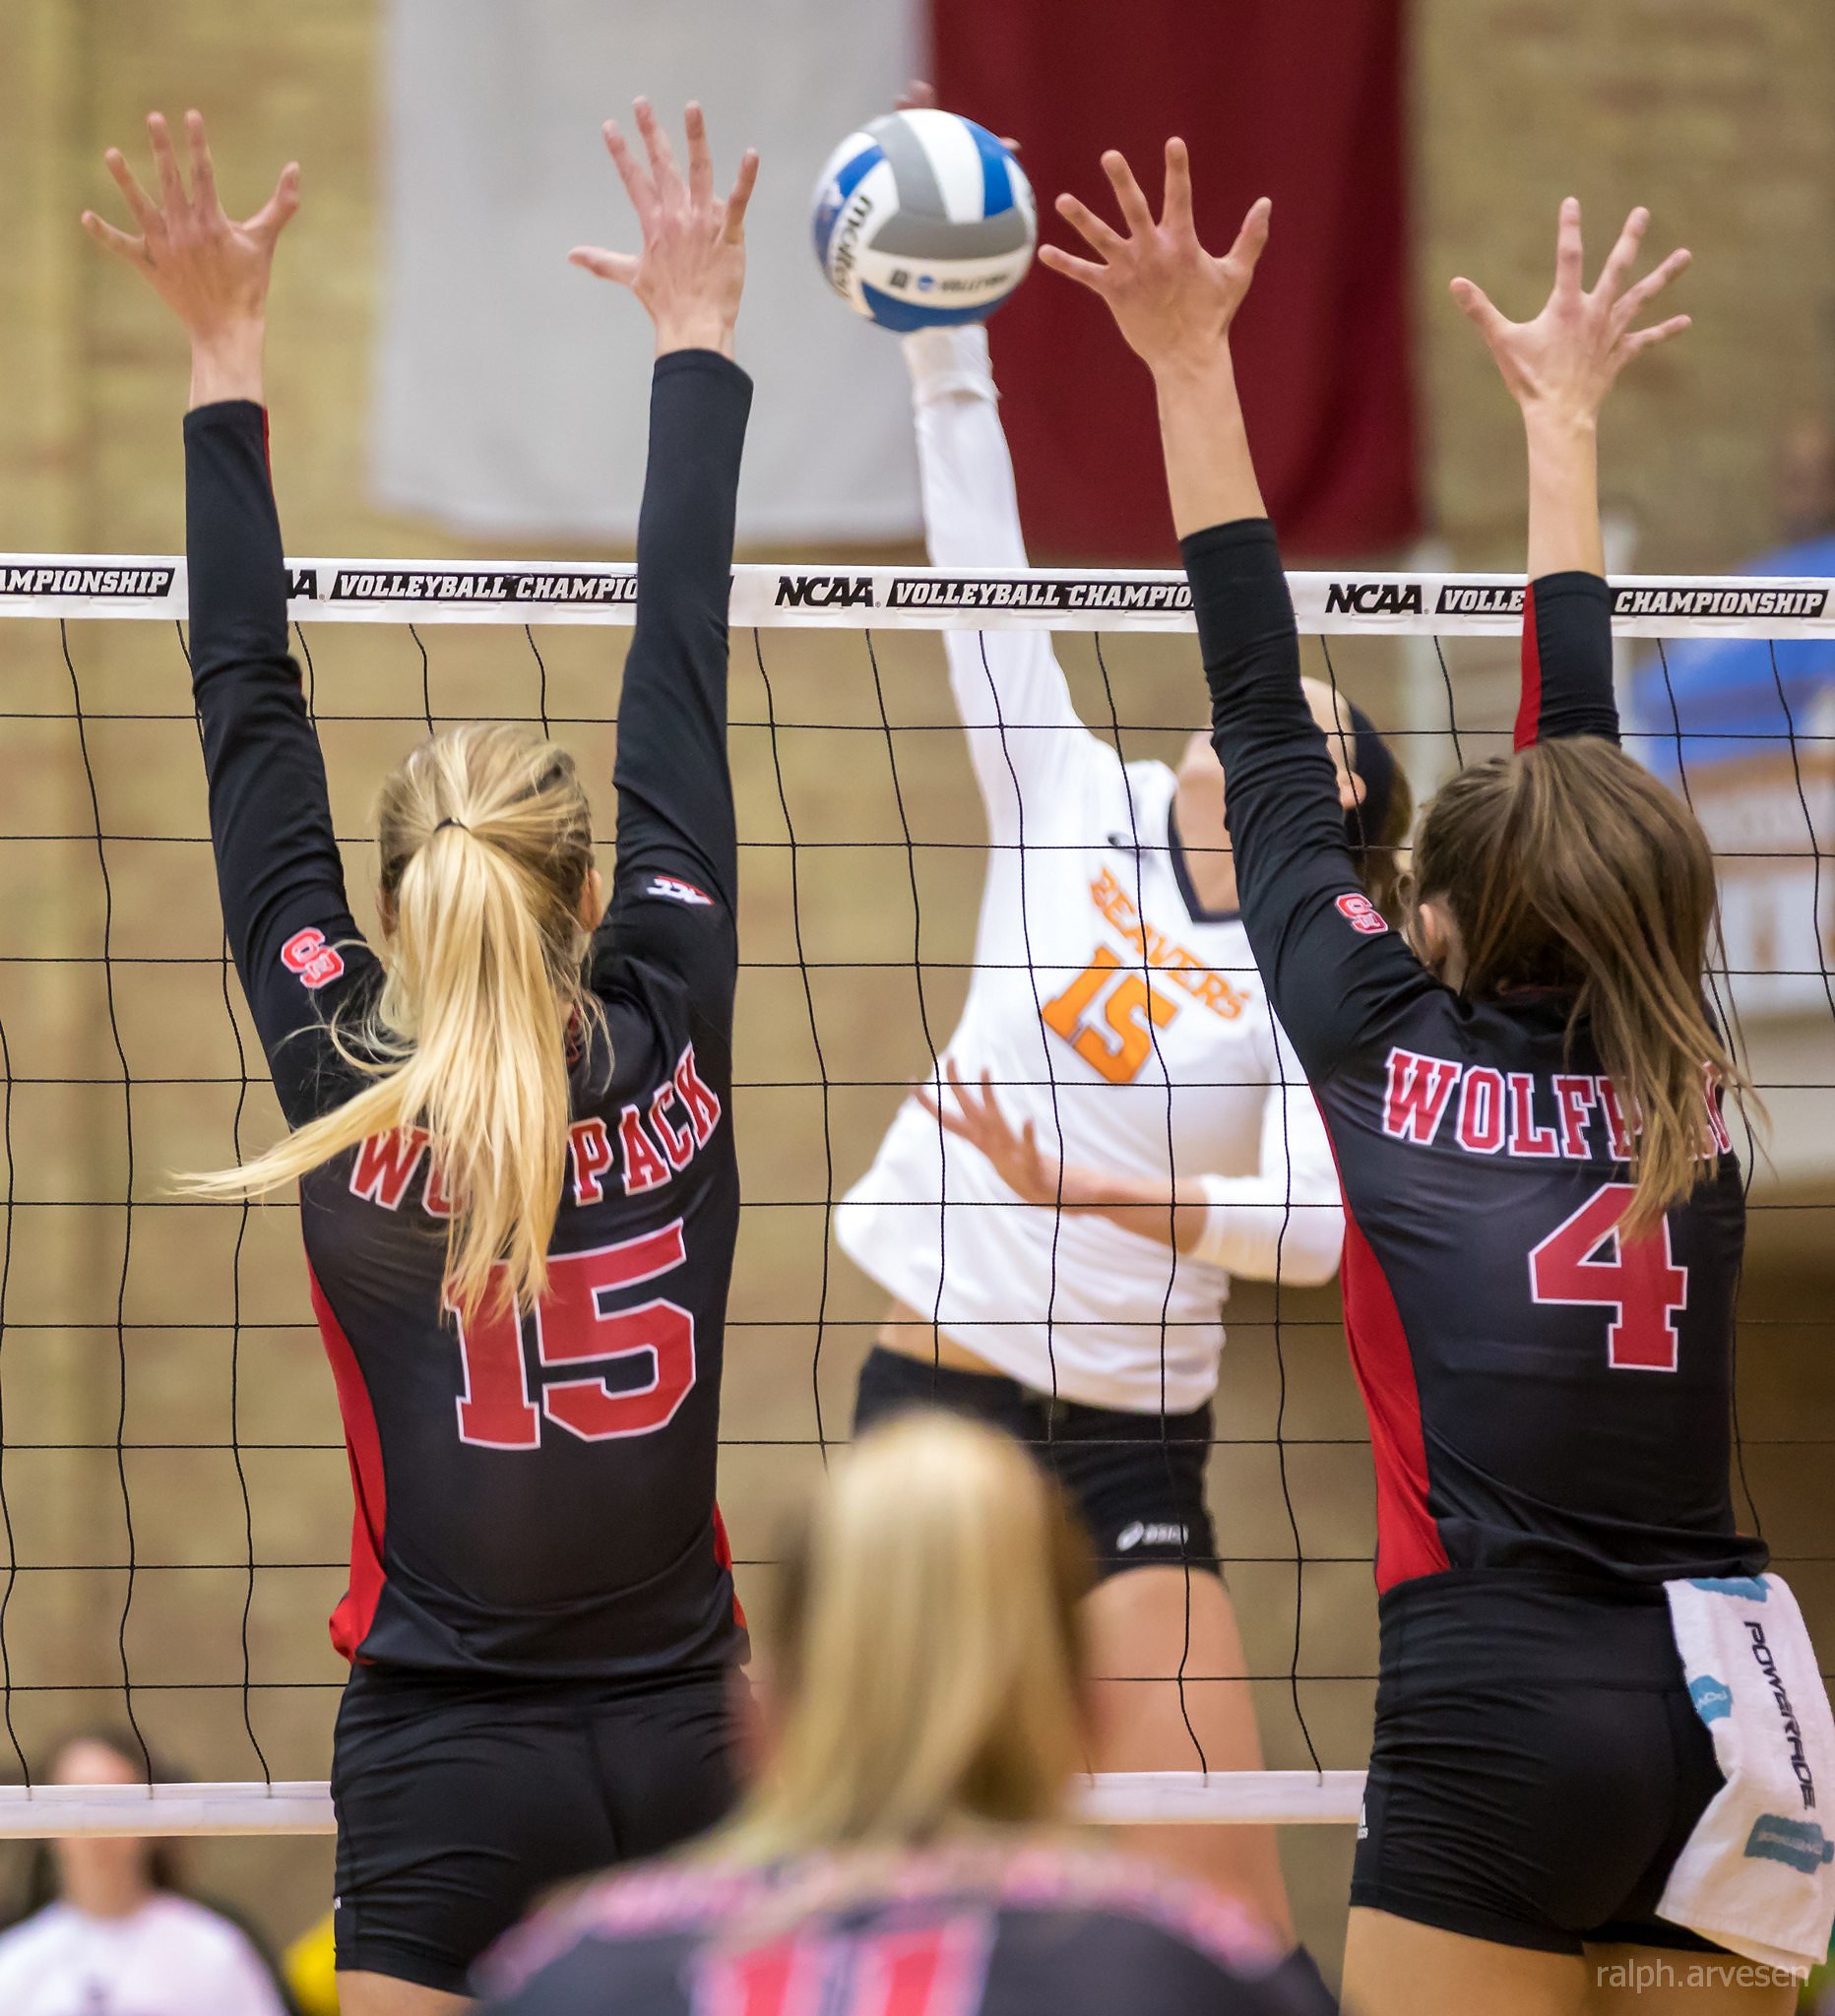 The Volleyball Block: Improve Defensive Skills With Tips on Blocking (Al Case)